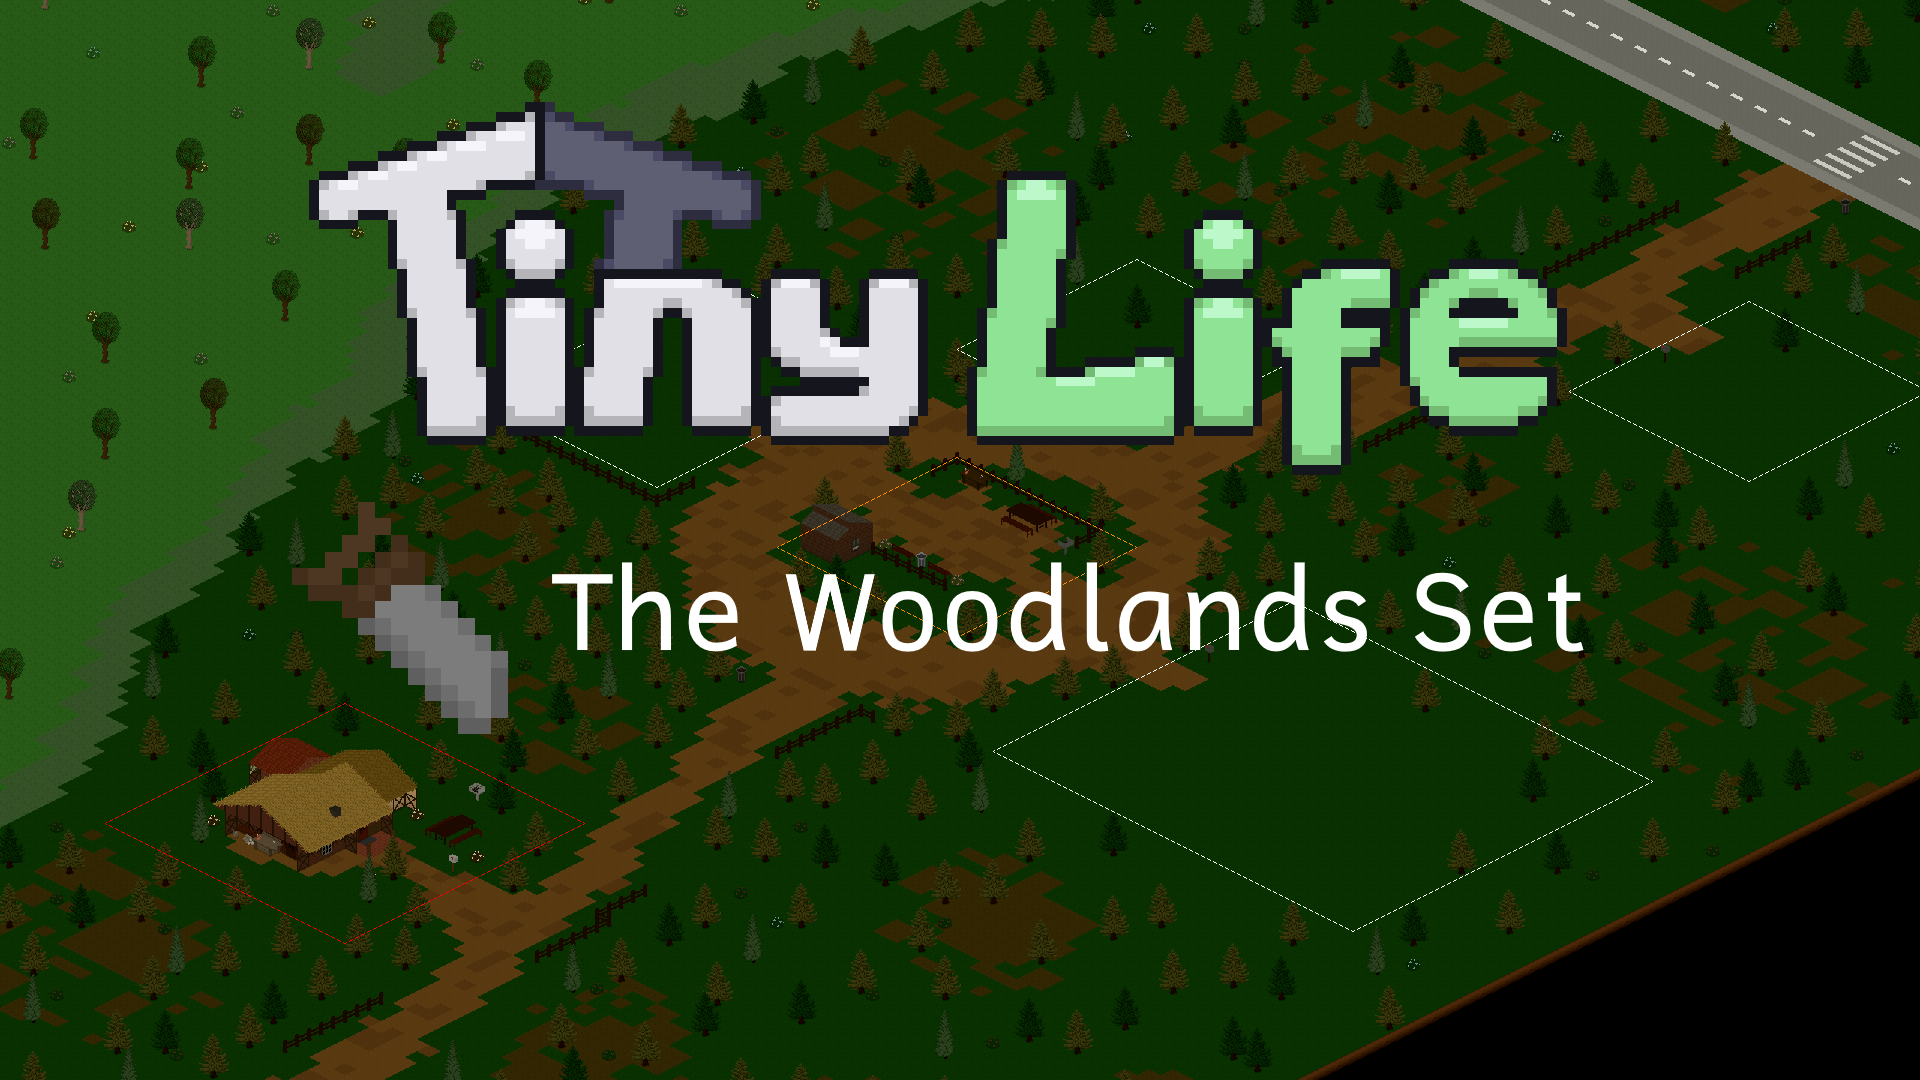 The Release Date is Here! - Tiny Life by Ellpeck